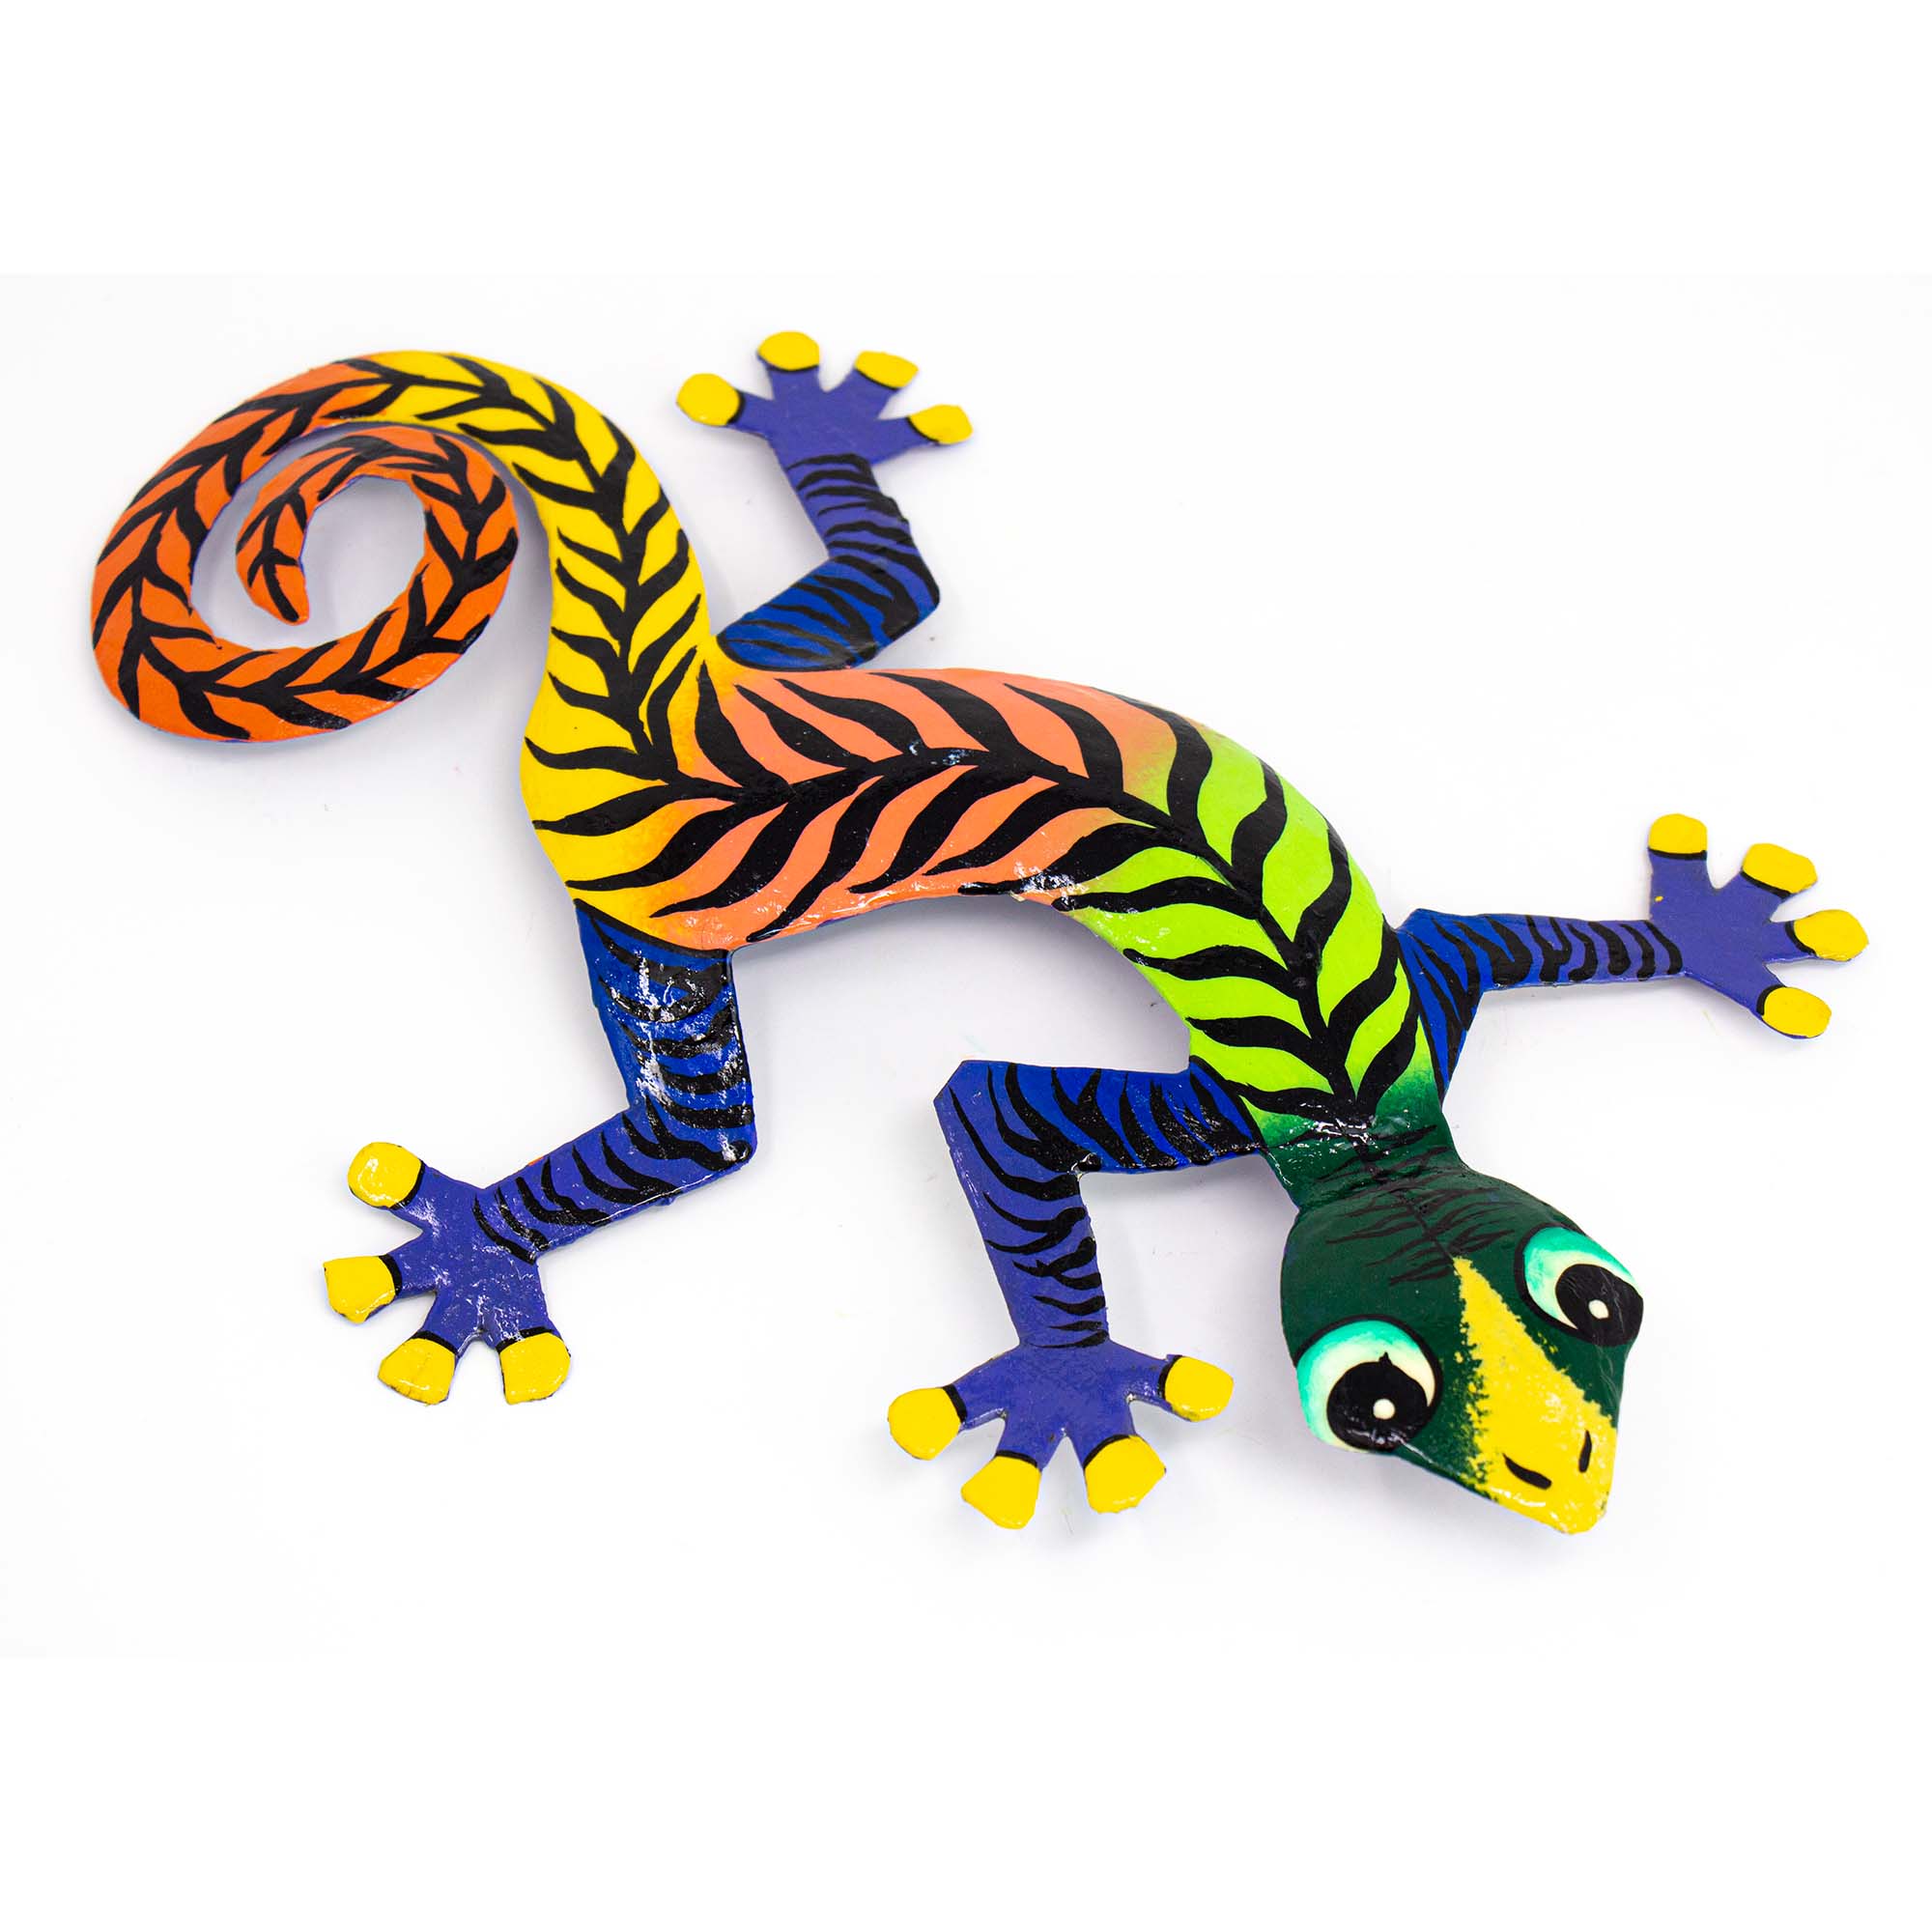 Colorful Gecko Haitian Steel Drum Wall Art, 13 inch Black Stipes Global  Crafts Wholesale